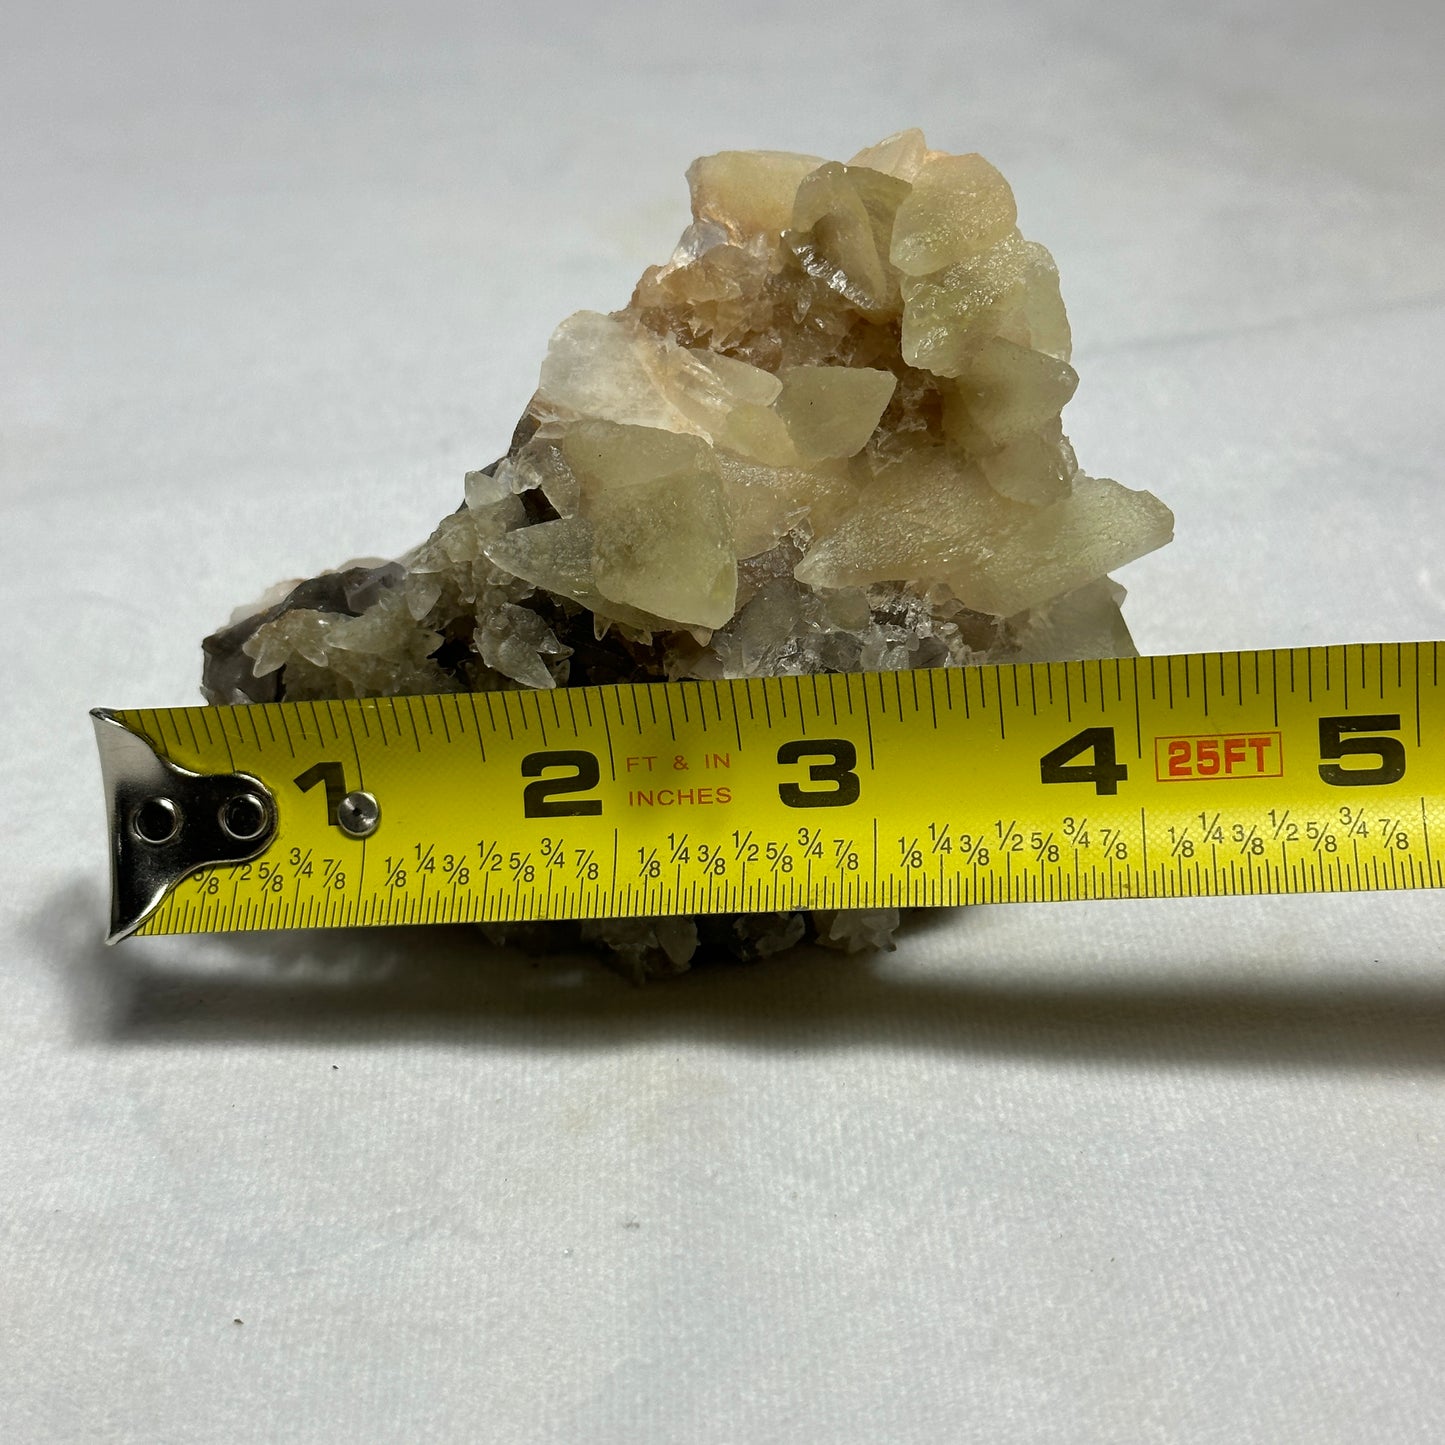 Eye-Catching Dogtooth Calcite and Fluorite